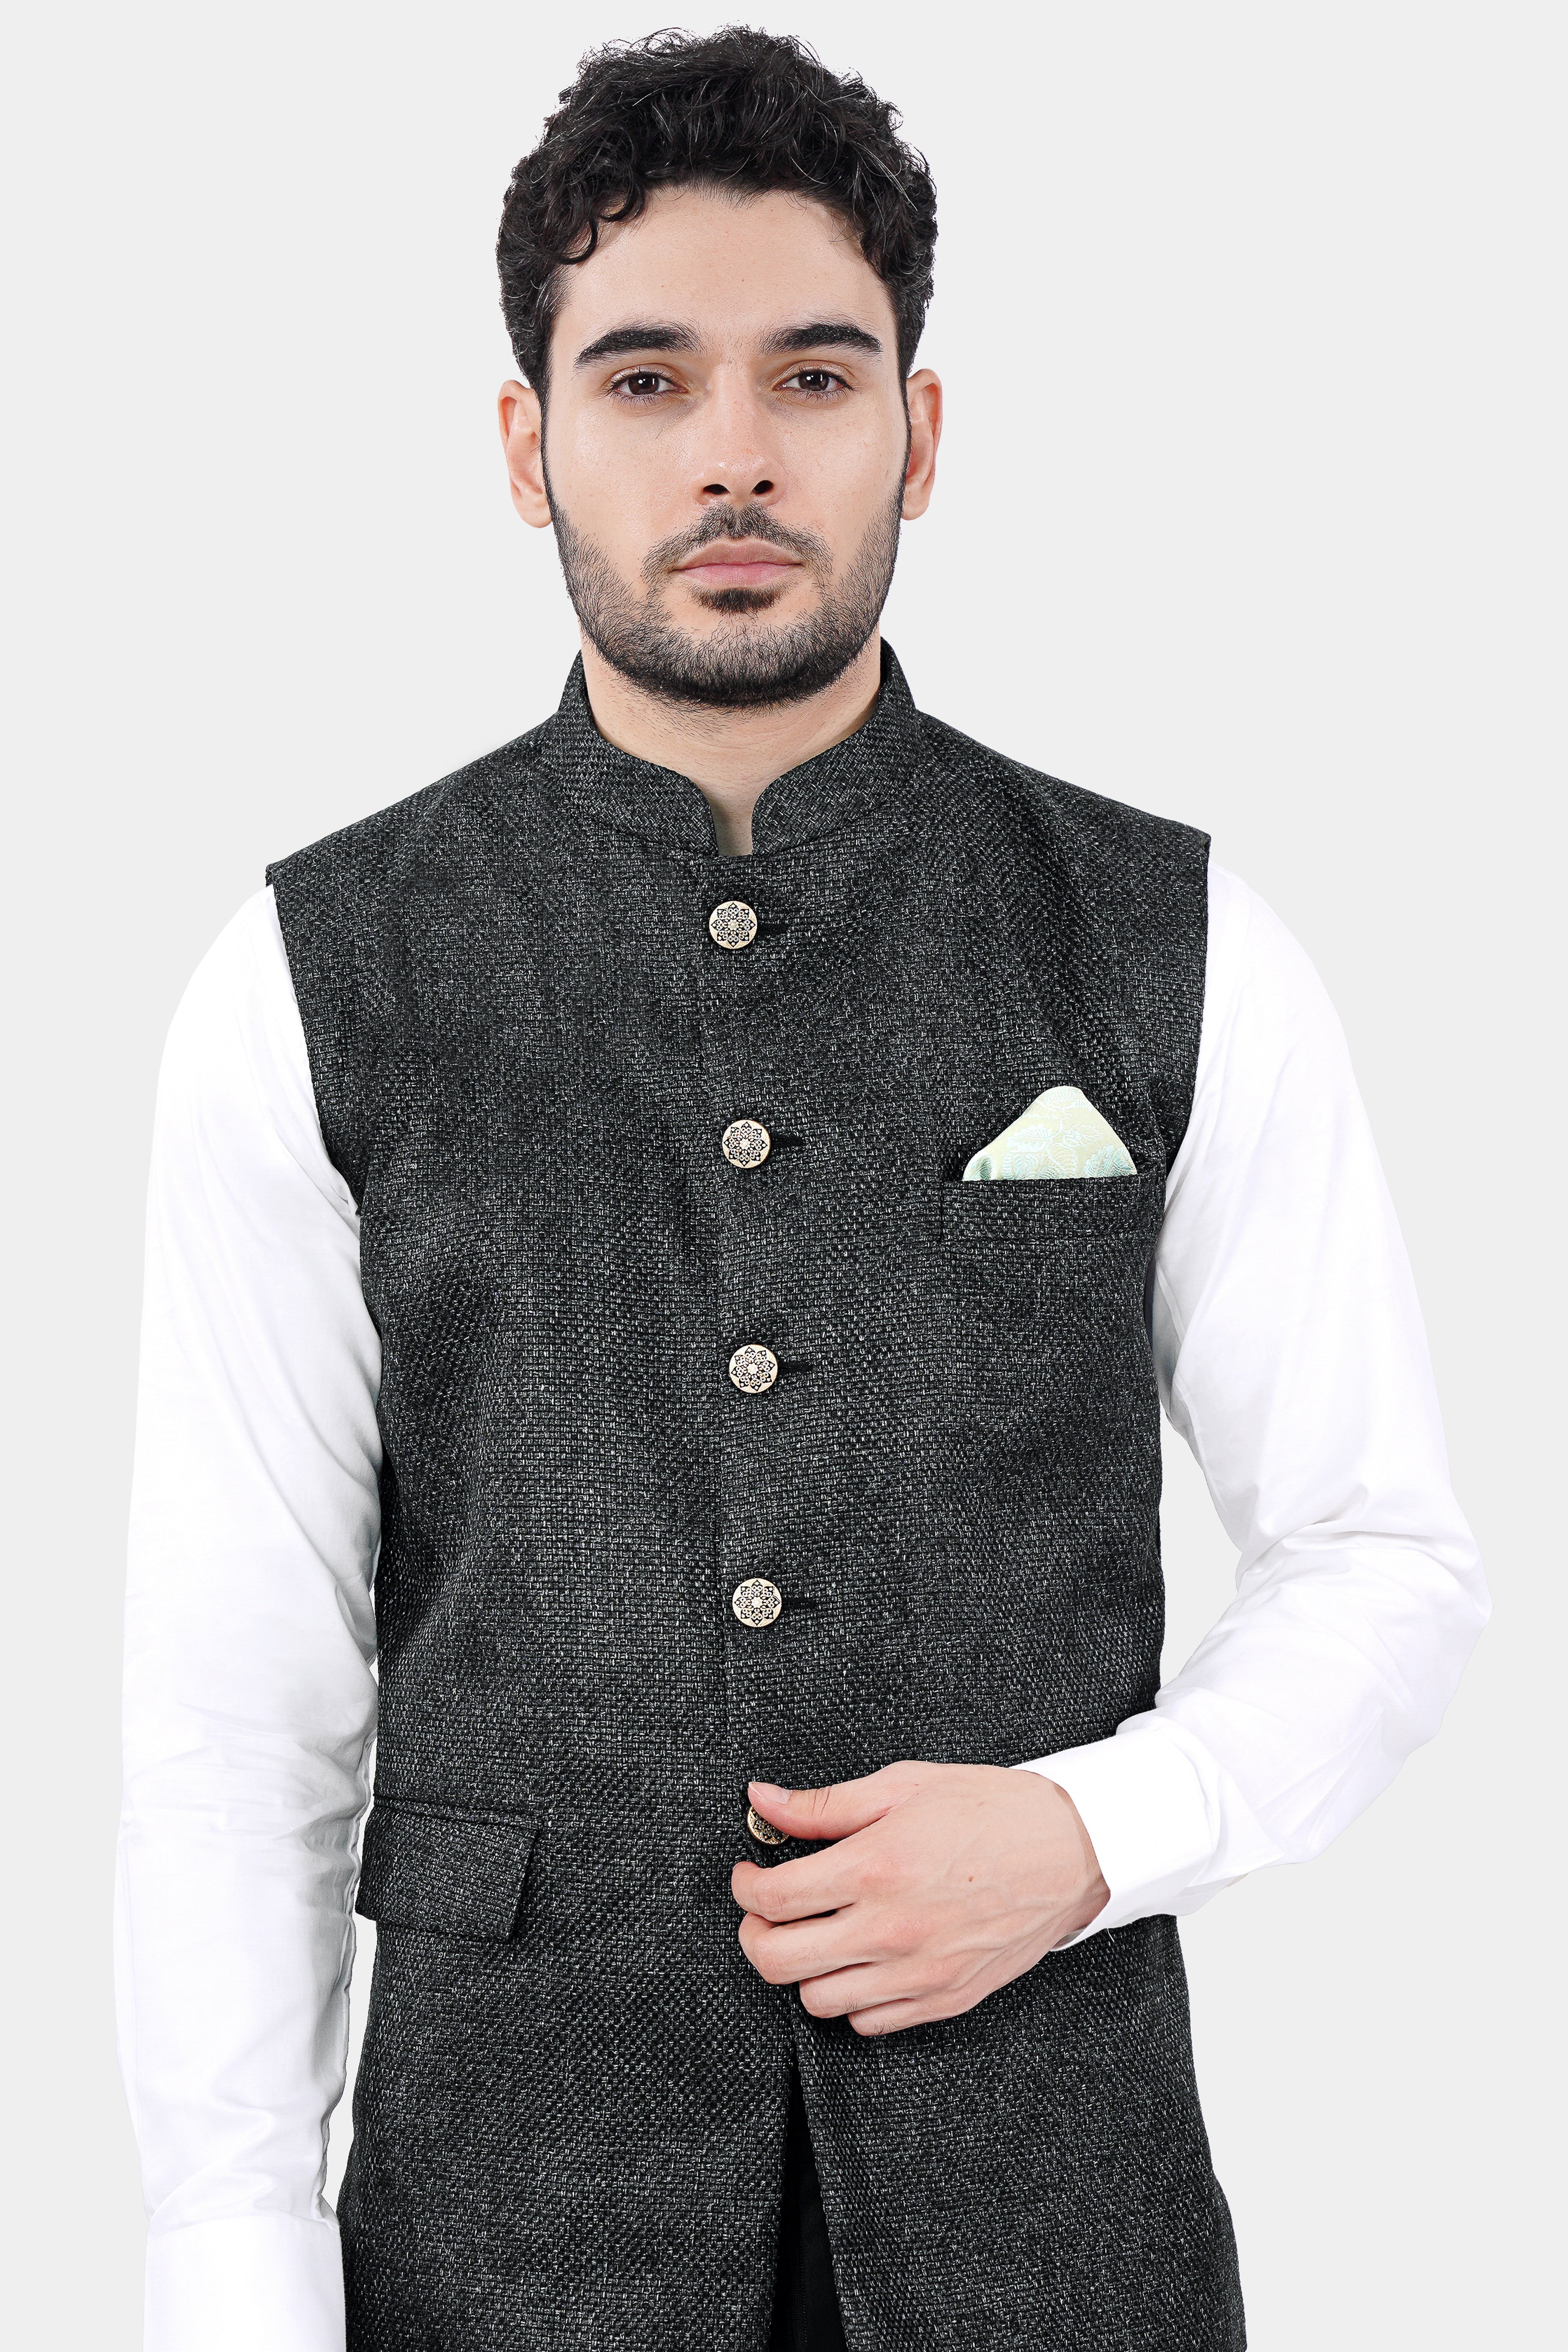 Arsenic Gray Woolrich Single Breasted Nehru Jacket WC3030-36, WC3030-38, WC3030-40, WC3030-42, WC3030-44, WC3030-46, WC3030-48, WC3030-50, WC3030-52, WC3030-54, WC3030-56, WC3030-58, WC3030-60